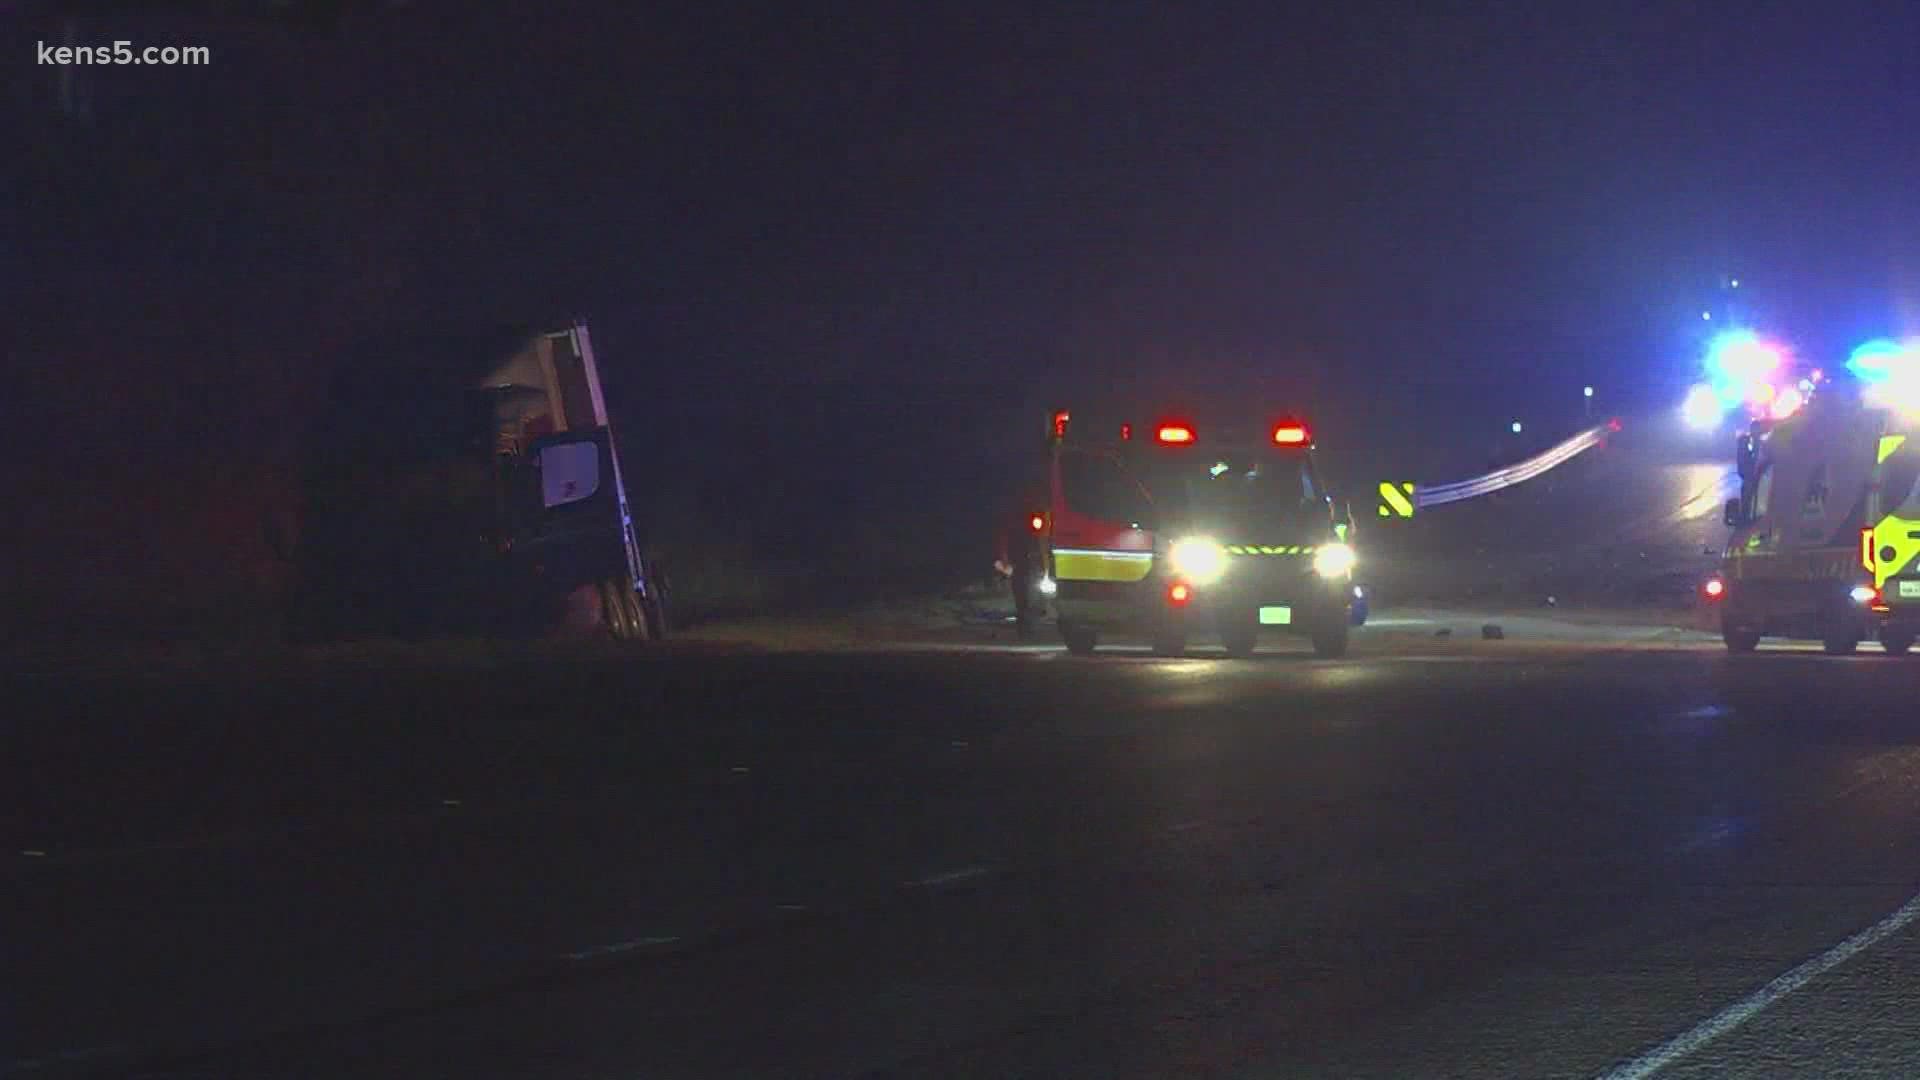 A 26-year-old man was killed in the crash after he entered the lane of an oncoming 18-wheeler --- hitting the truck head on, authorities say.